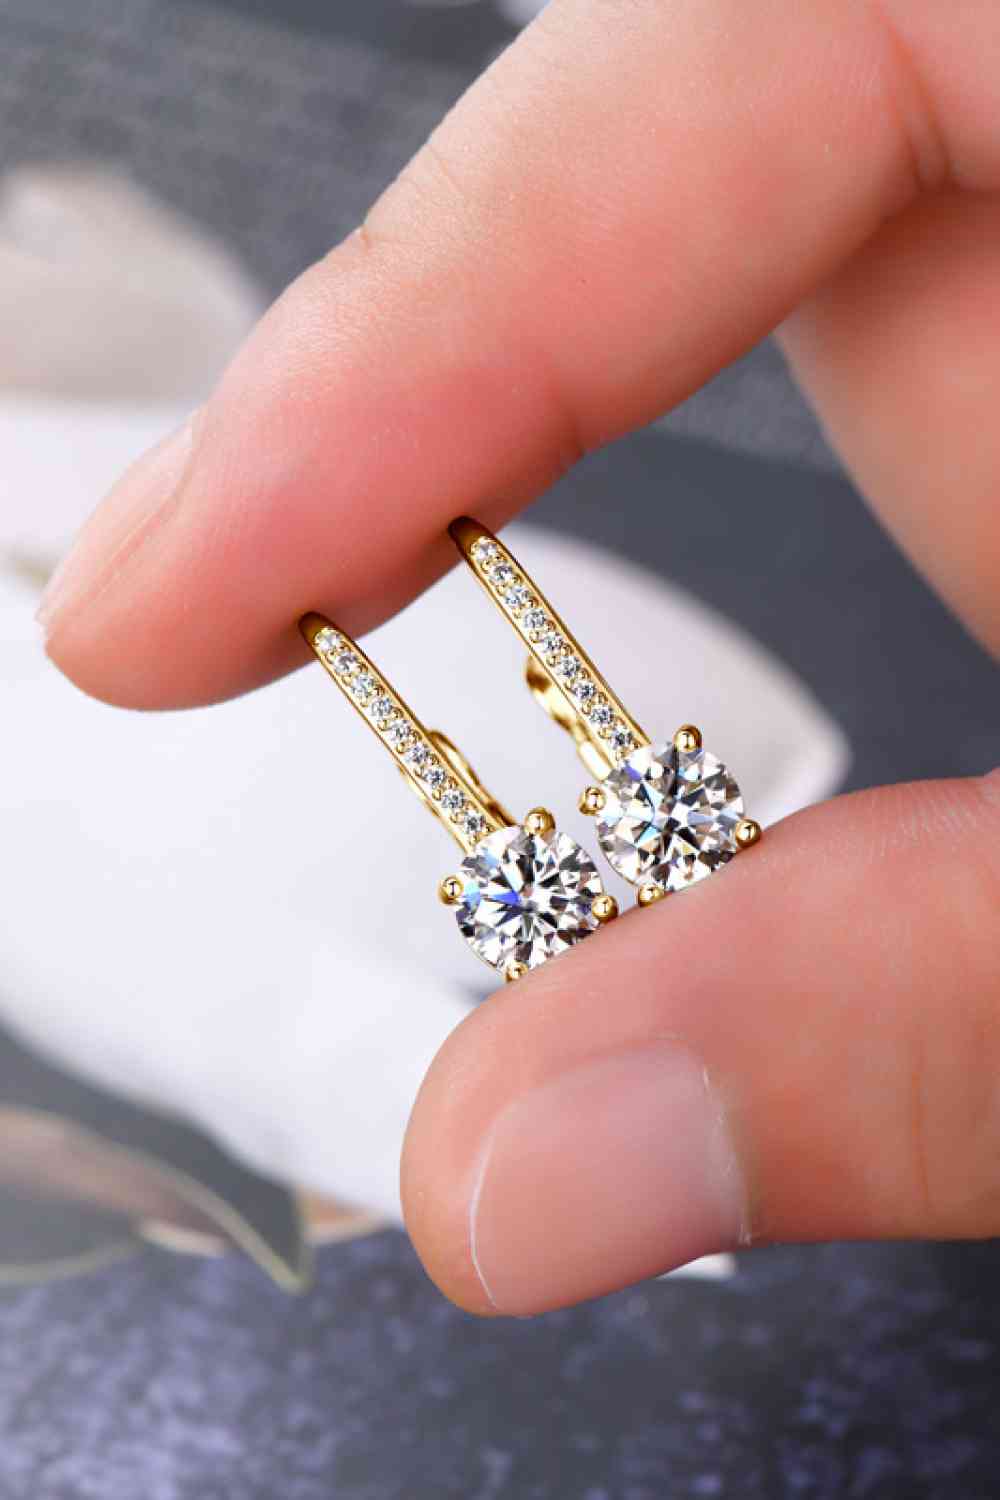 a person holding a pair of earrings in their hand